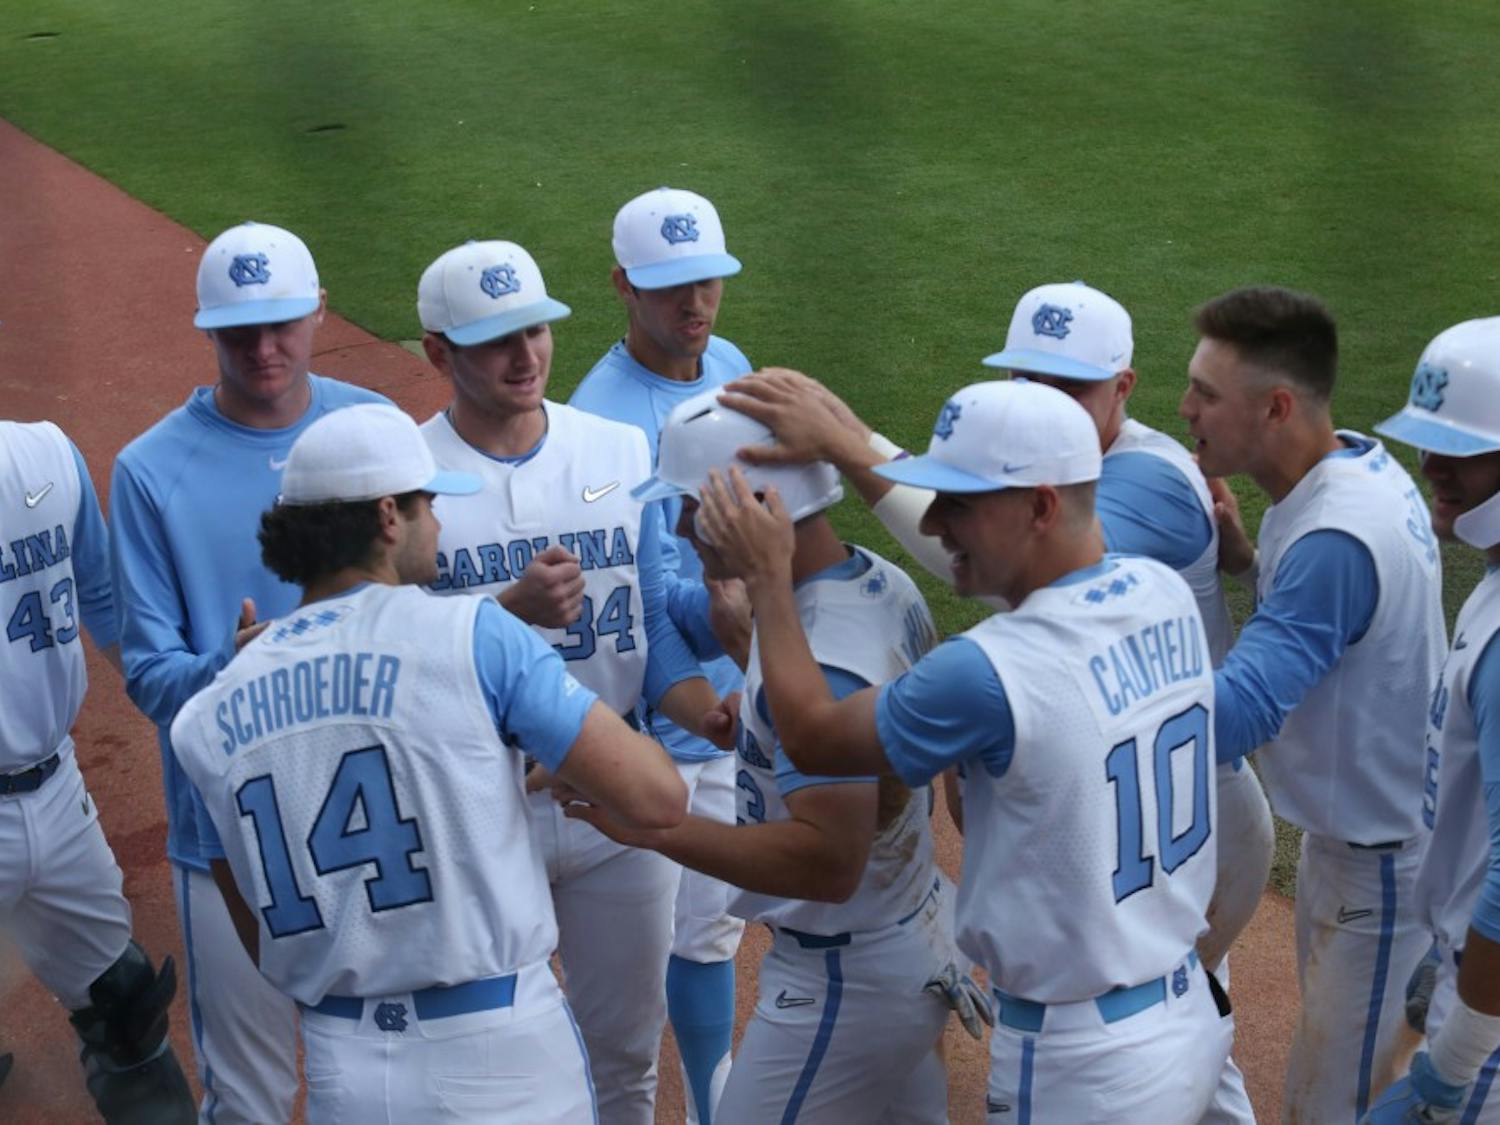 The Tar Heels' baseball team celebrates another run during their third baseball game against Boston College on Easter weekend, 2019.